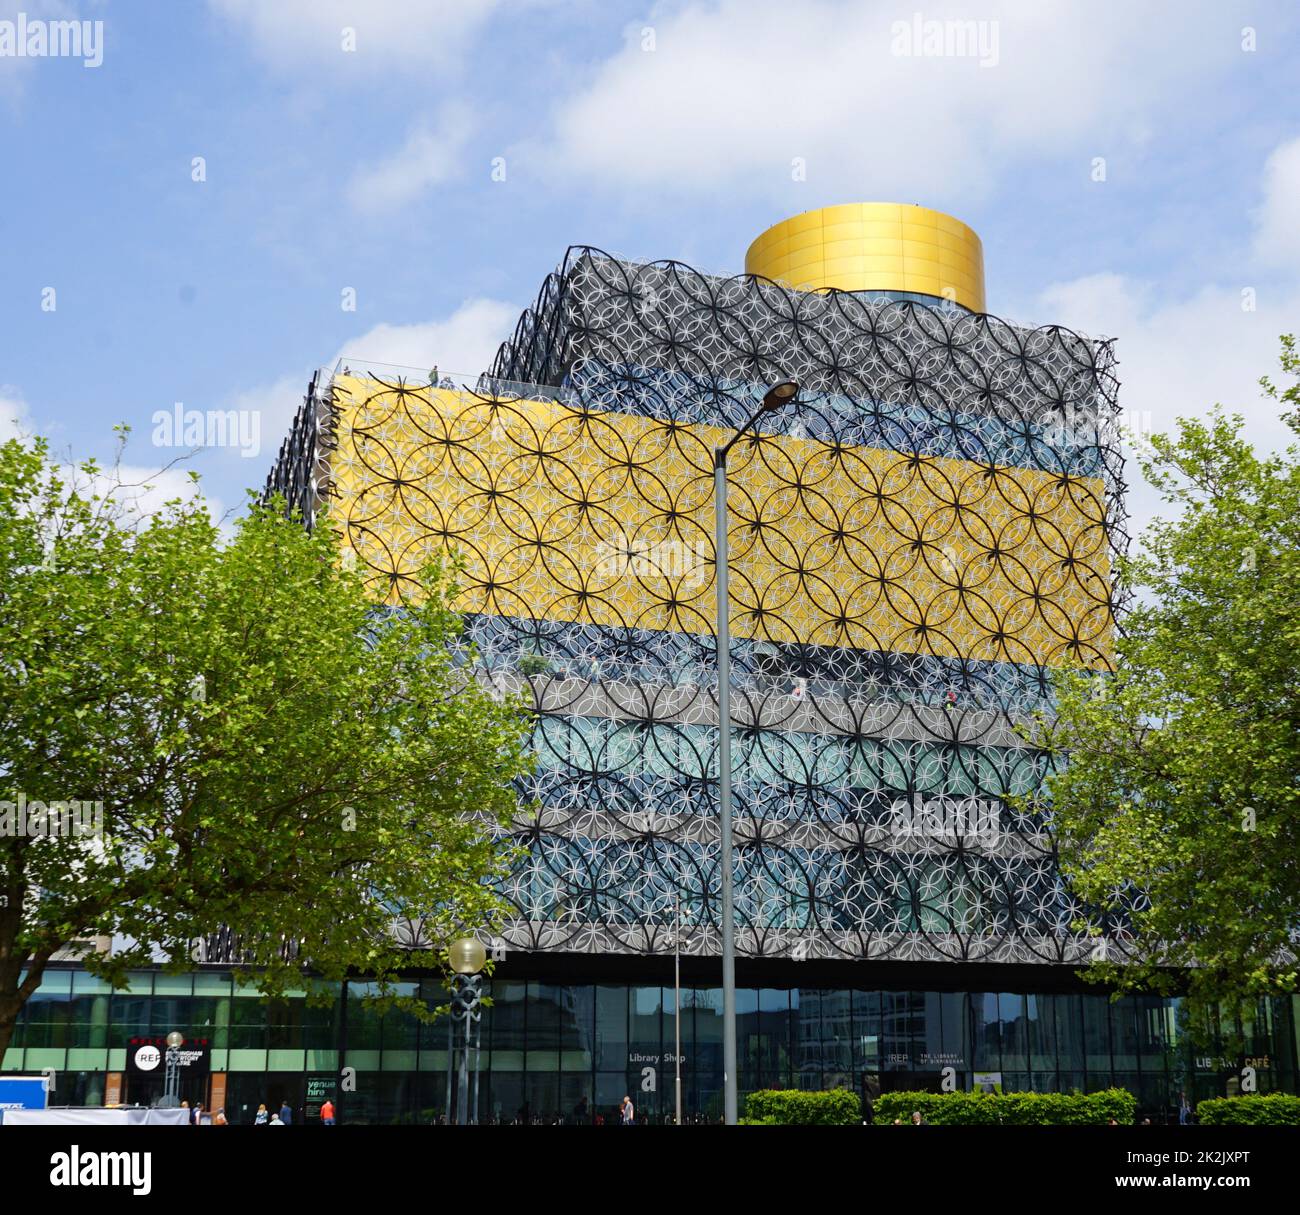 Post-modern, high tech, Library of Birmingham in Birmingham, England. designed by architect, Francine Houben in 2013. It is situated on the west side of the city centre at Centenary Square, beside the Birmingham Rep (to which it connects, and with which it shares some facilities) and Baskerville House. Upon opening on 3 September 2013 Stock Photo